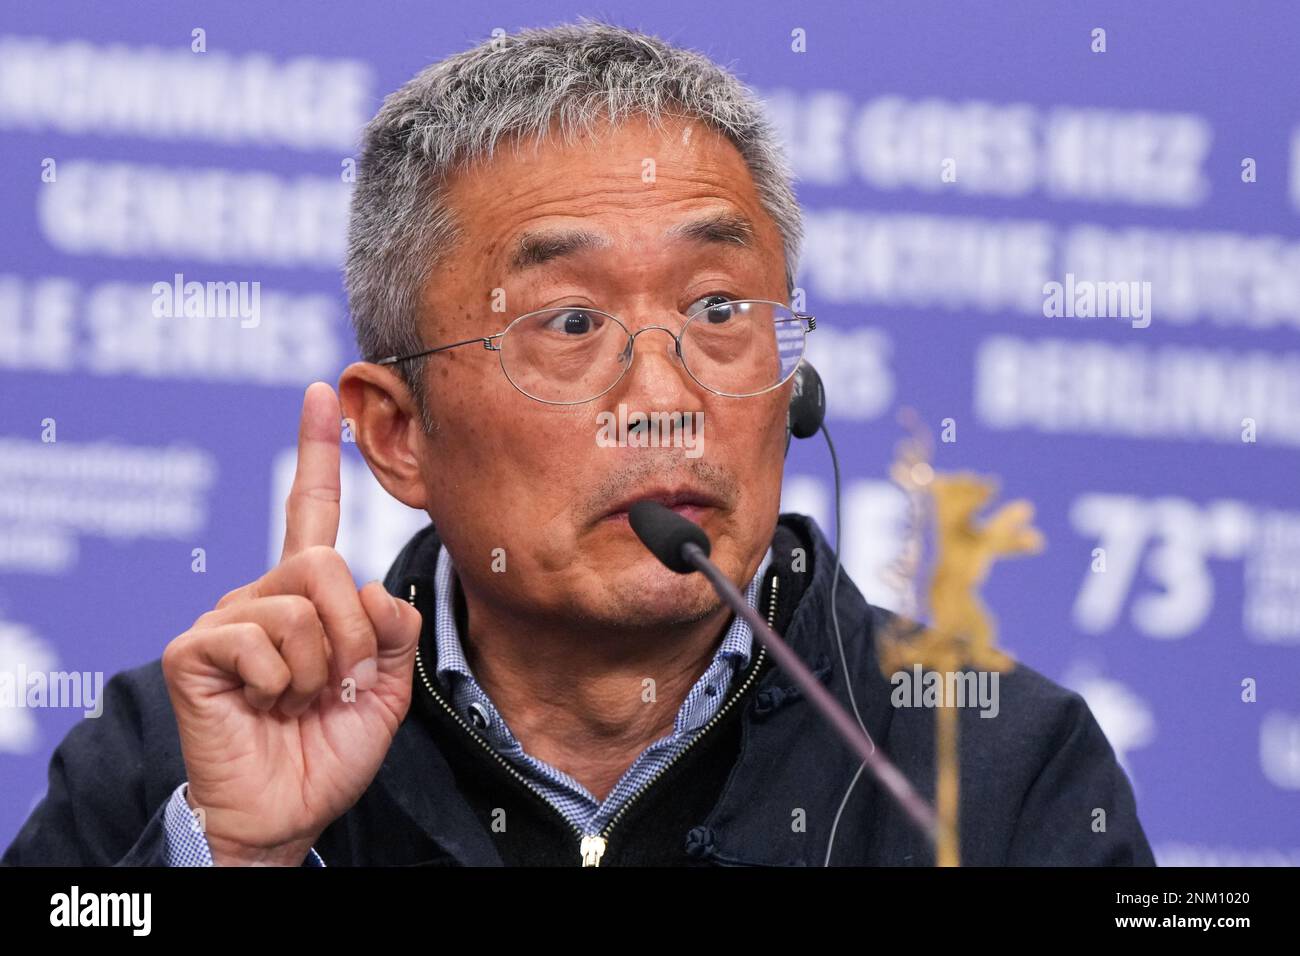 Berlin, Germany. 24th Feb, 2023. Wen Mao, actor, speaks at the press conference for the film 'L'Ultima Notte di Amore' (Last Night of Amore), which will screen in the Berlinale Special Gala section of the Berlinale. The 73rd Berlin International Film Festival will take place from Feb. 16-26, 2023. Credit: Soeren Stache/dpa/Alamy Live News Stock Photo